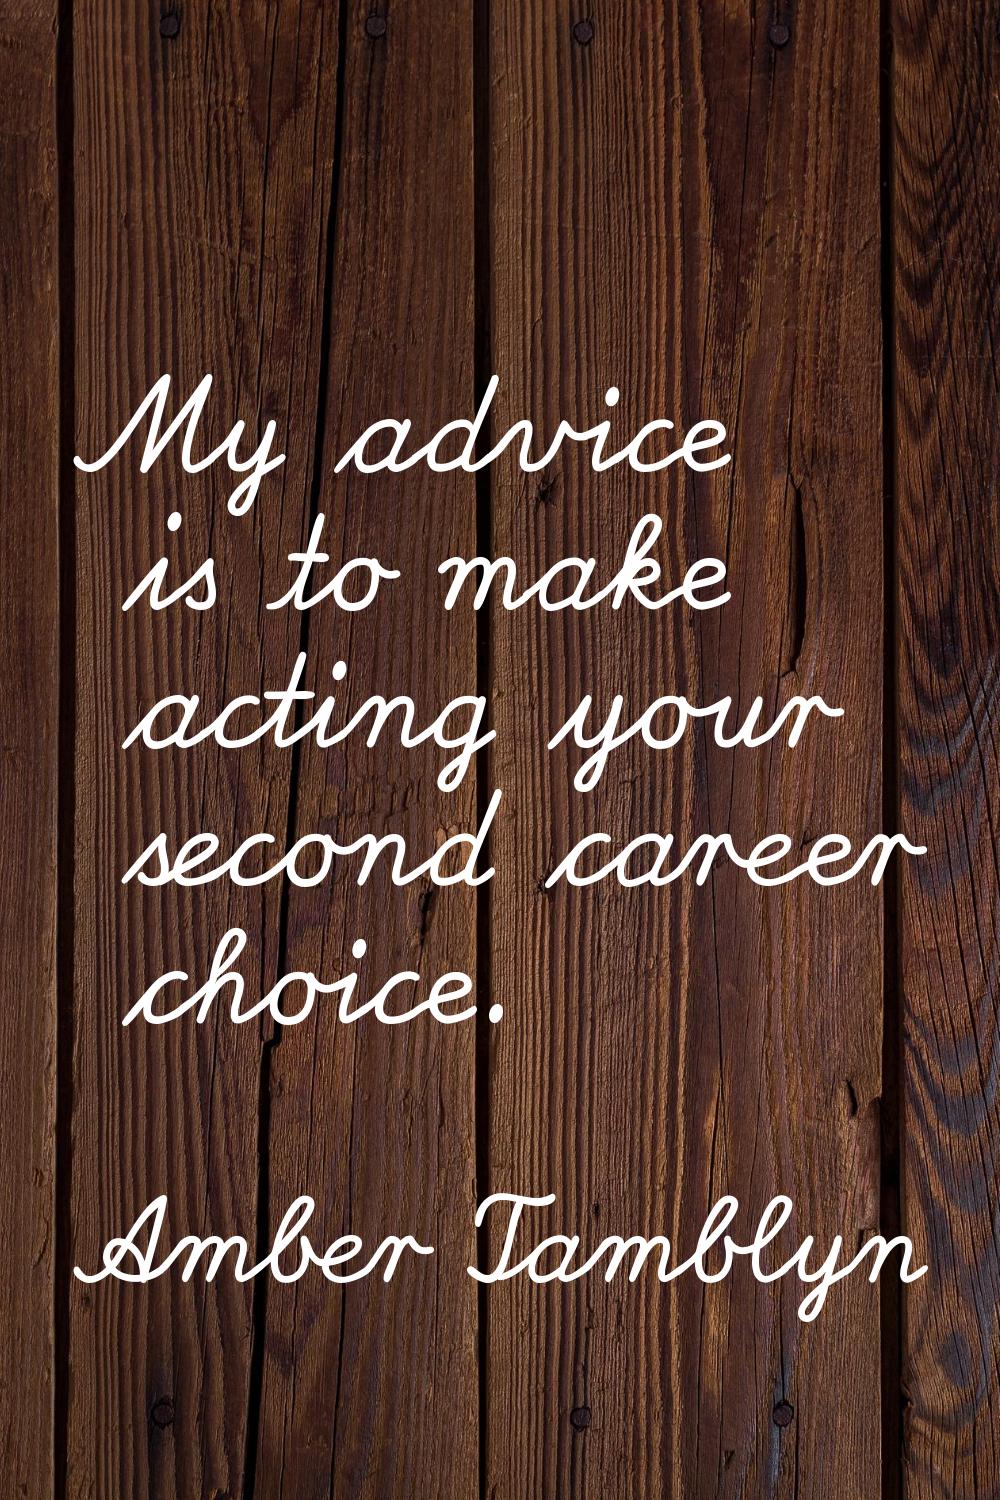 My advice is to make acting your second career choice.